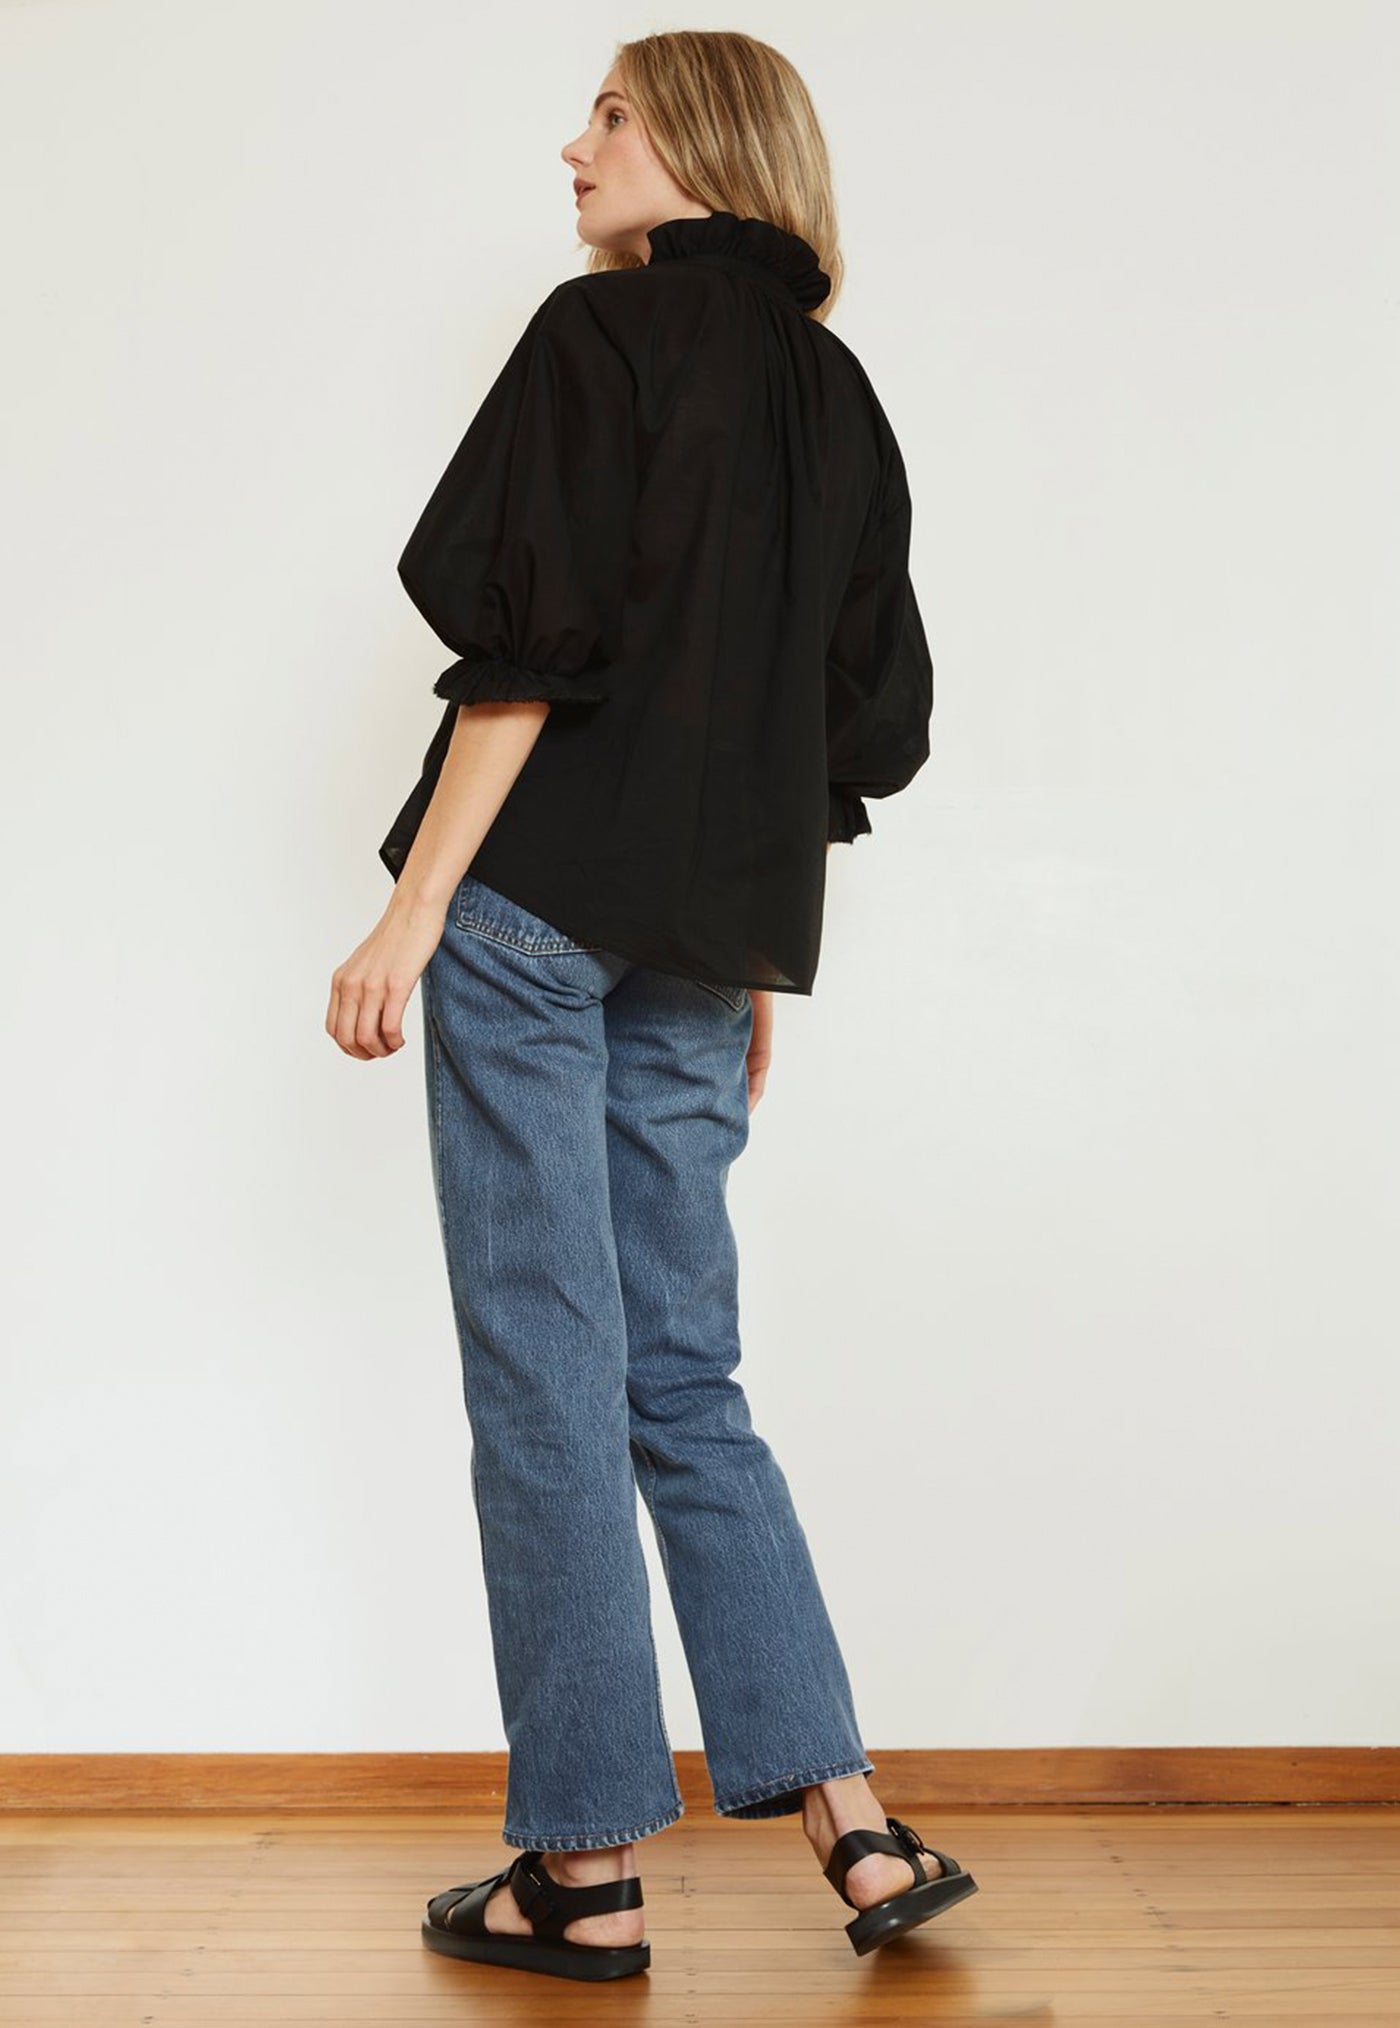 Ruffle Blouse - Black Cotton Voile sold by Angel Divine